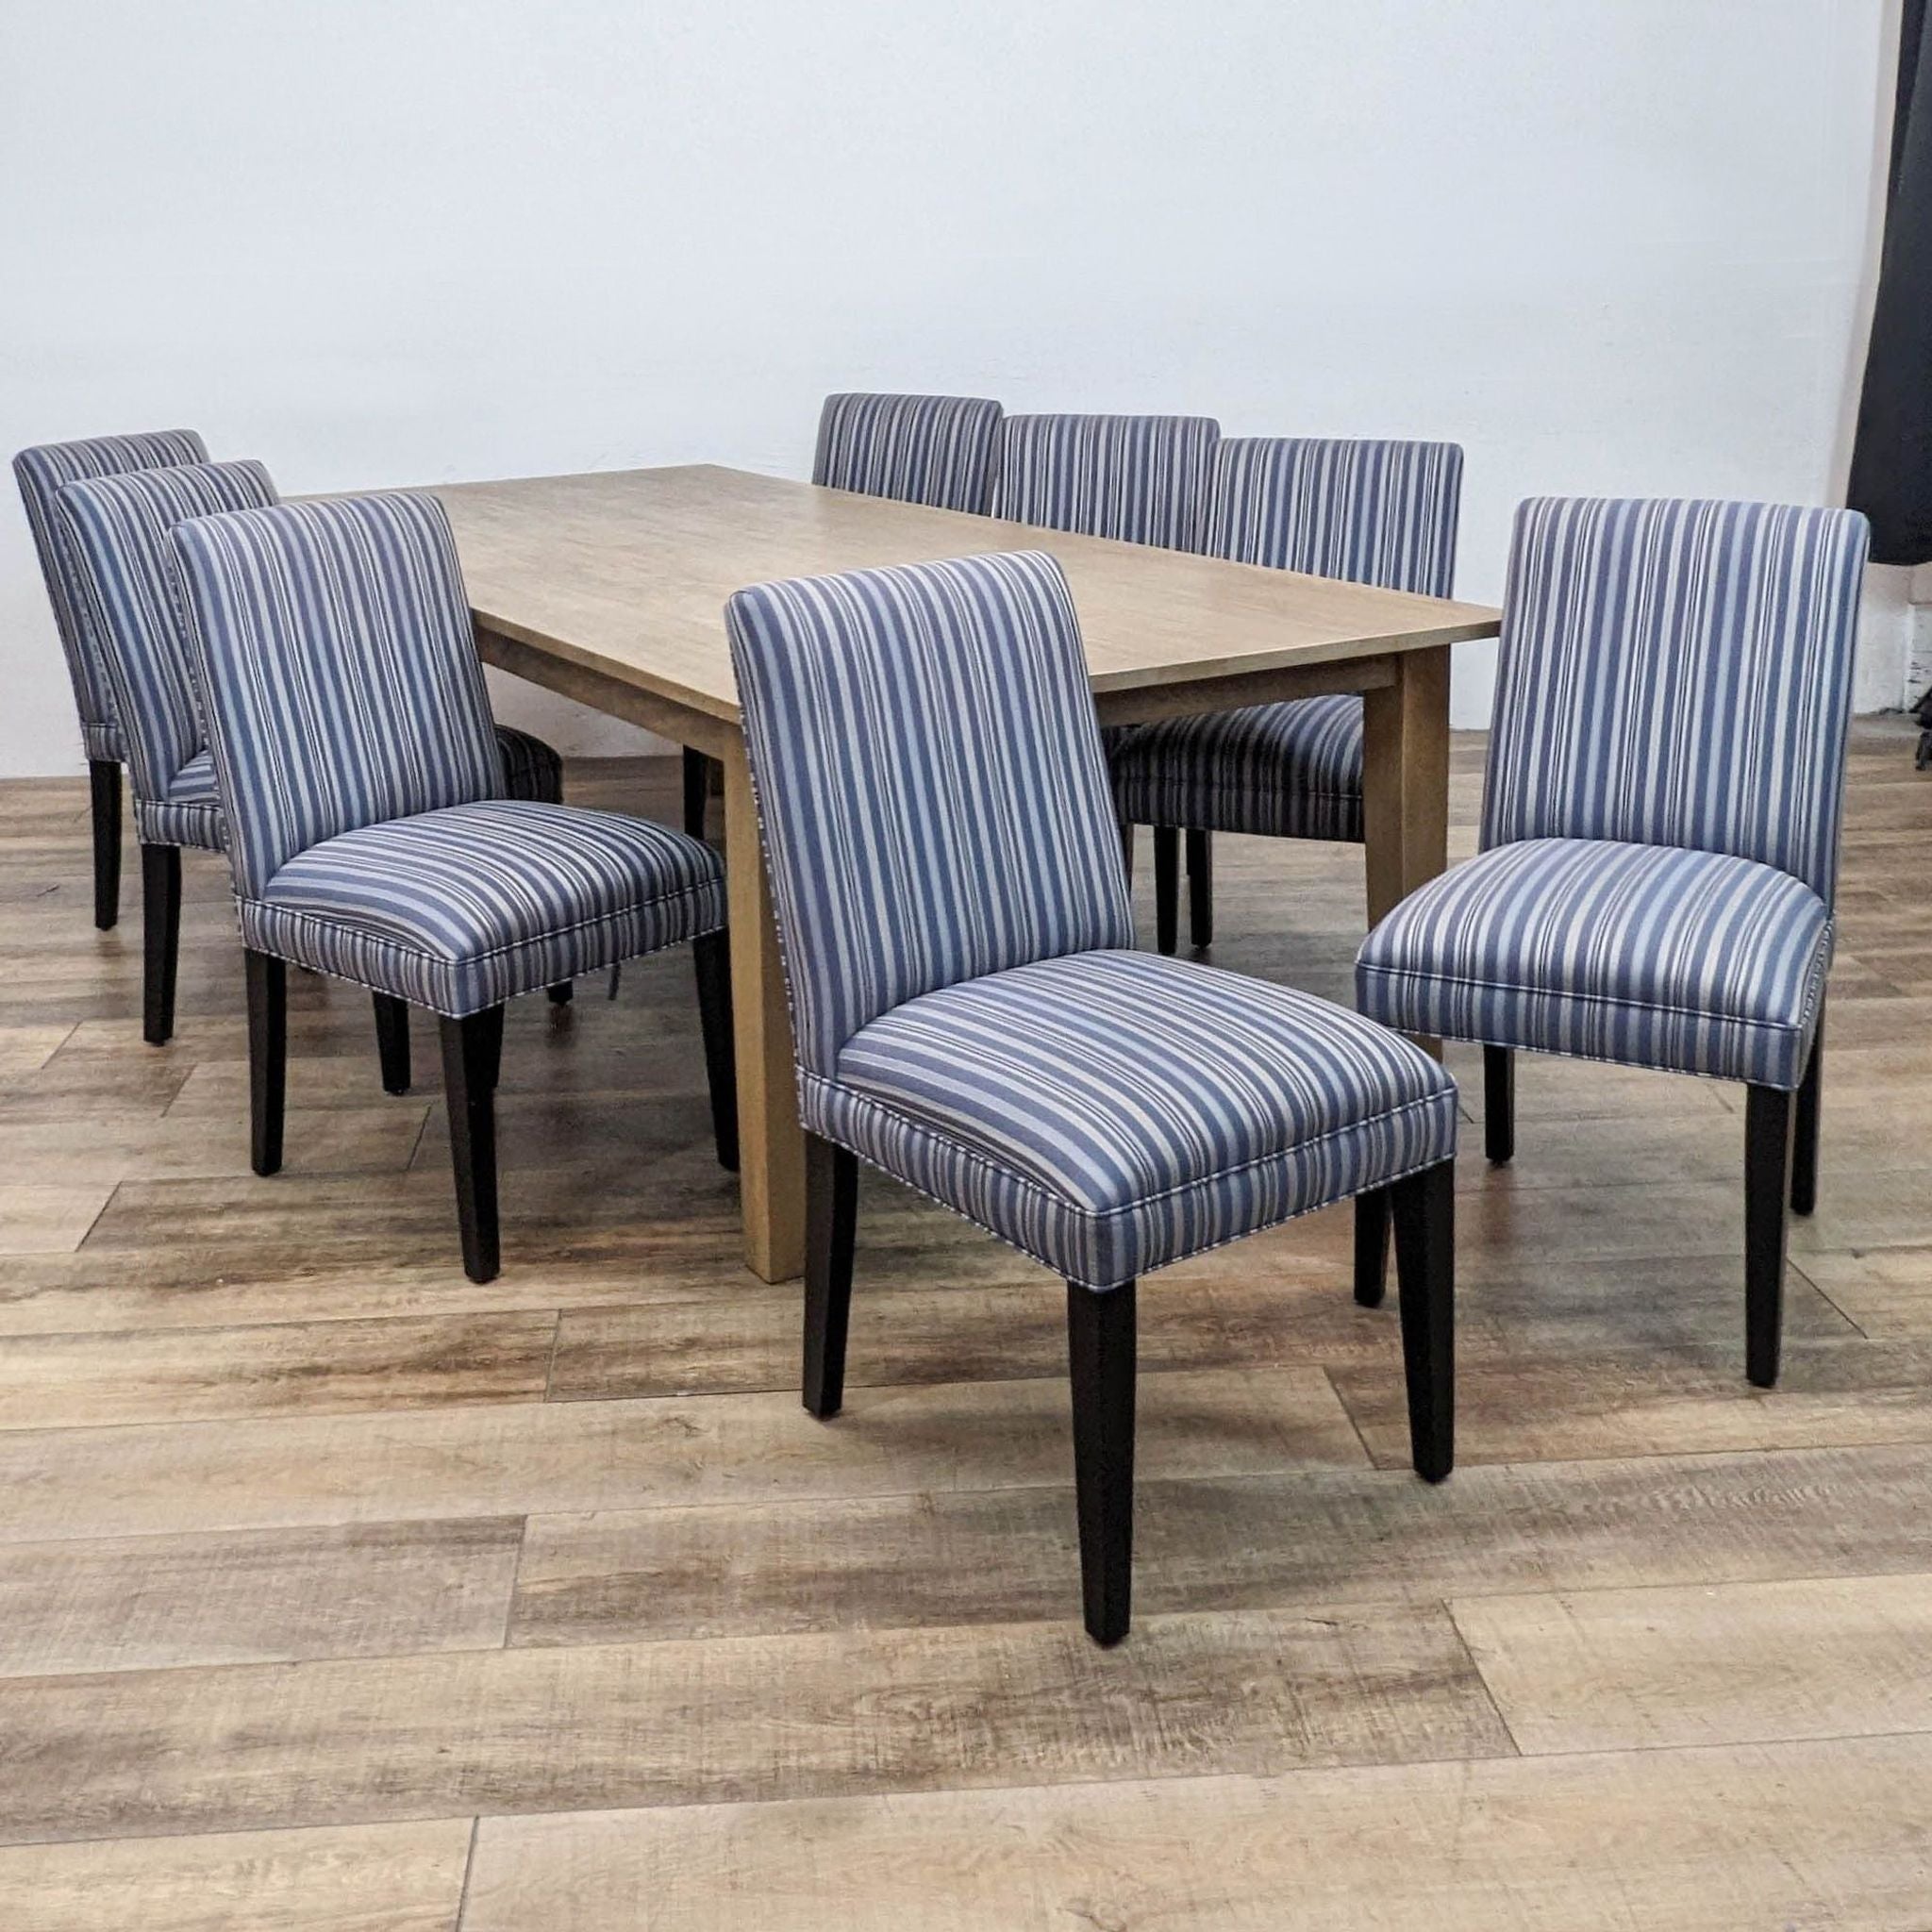 Reperch 9-piece dining set with natural wood finish table and striped upholstered chairs.